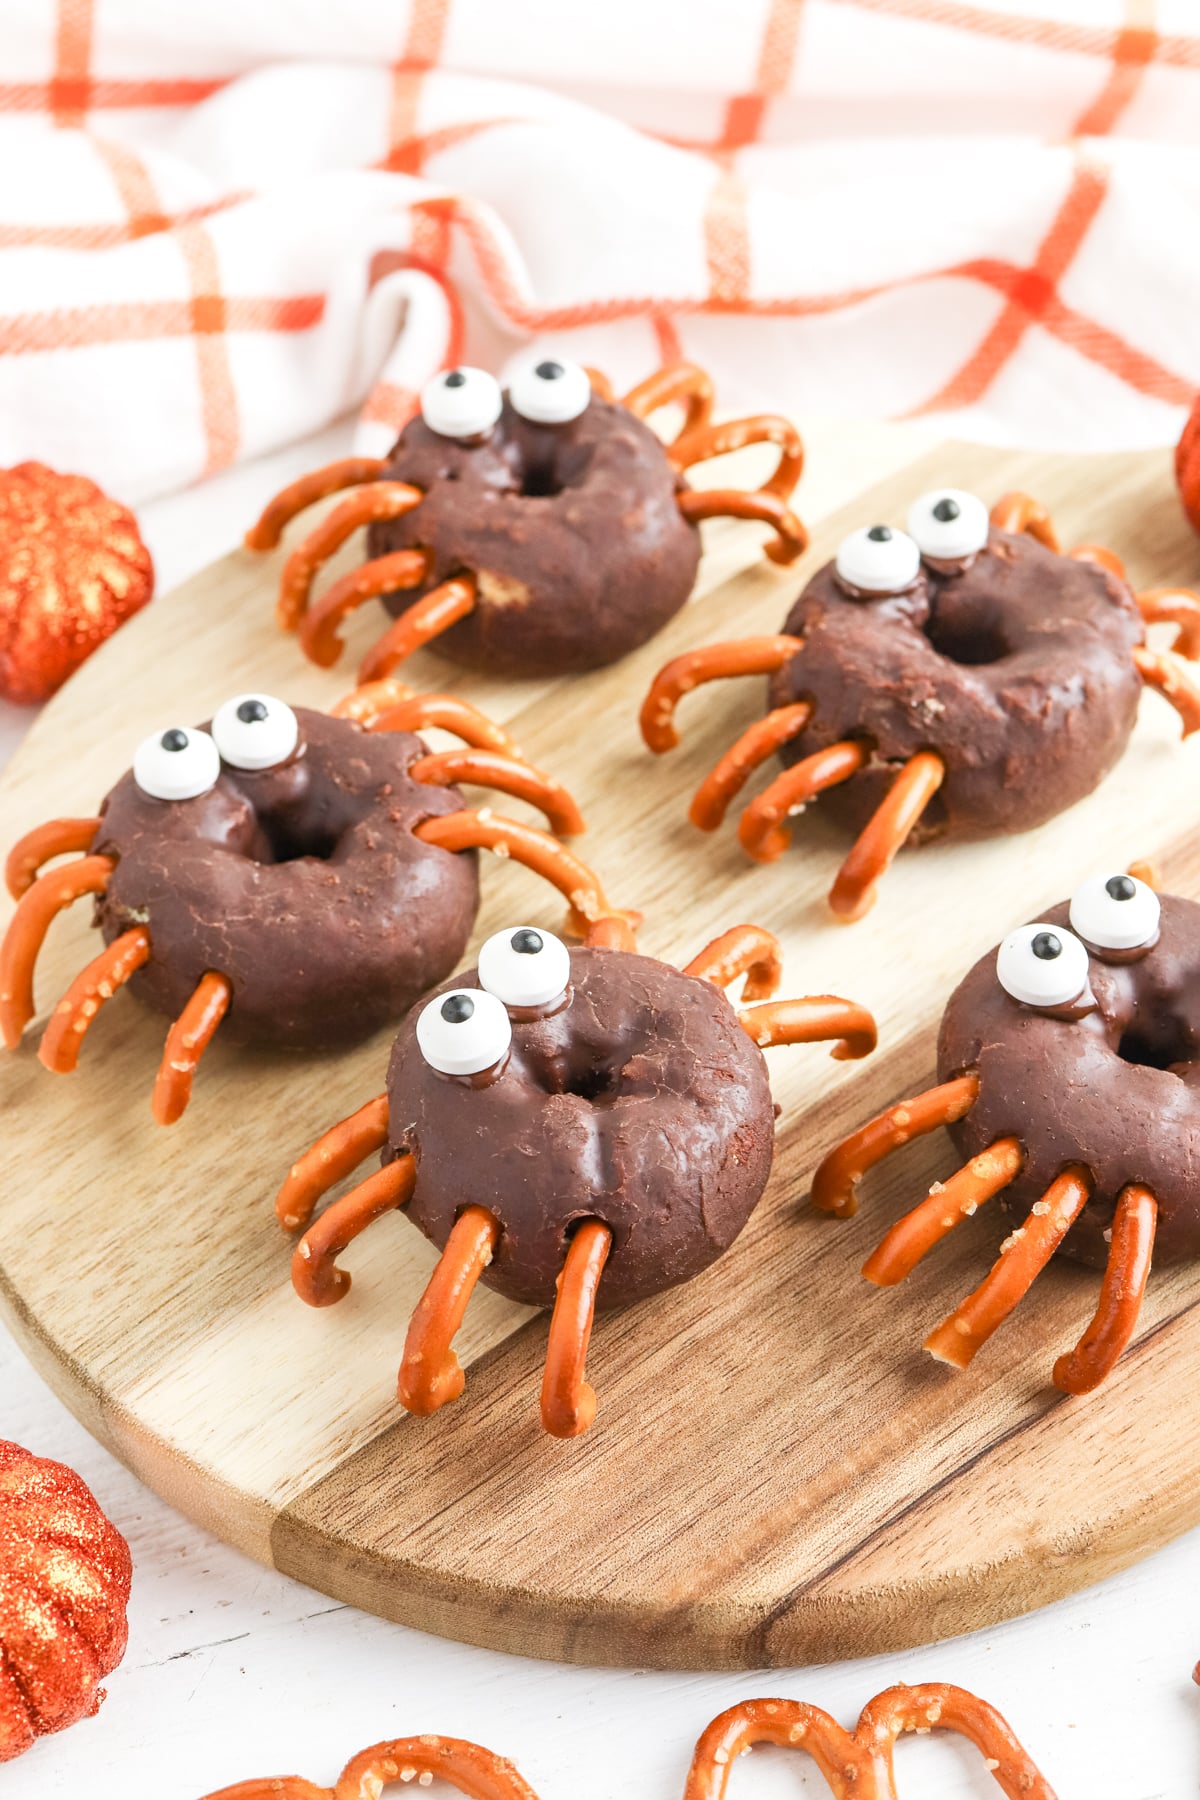 display spider donuts on tray